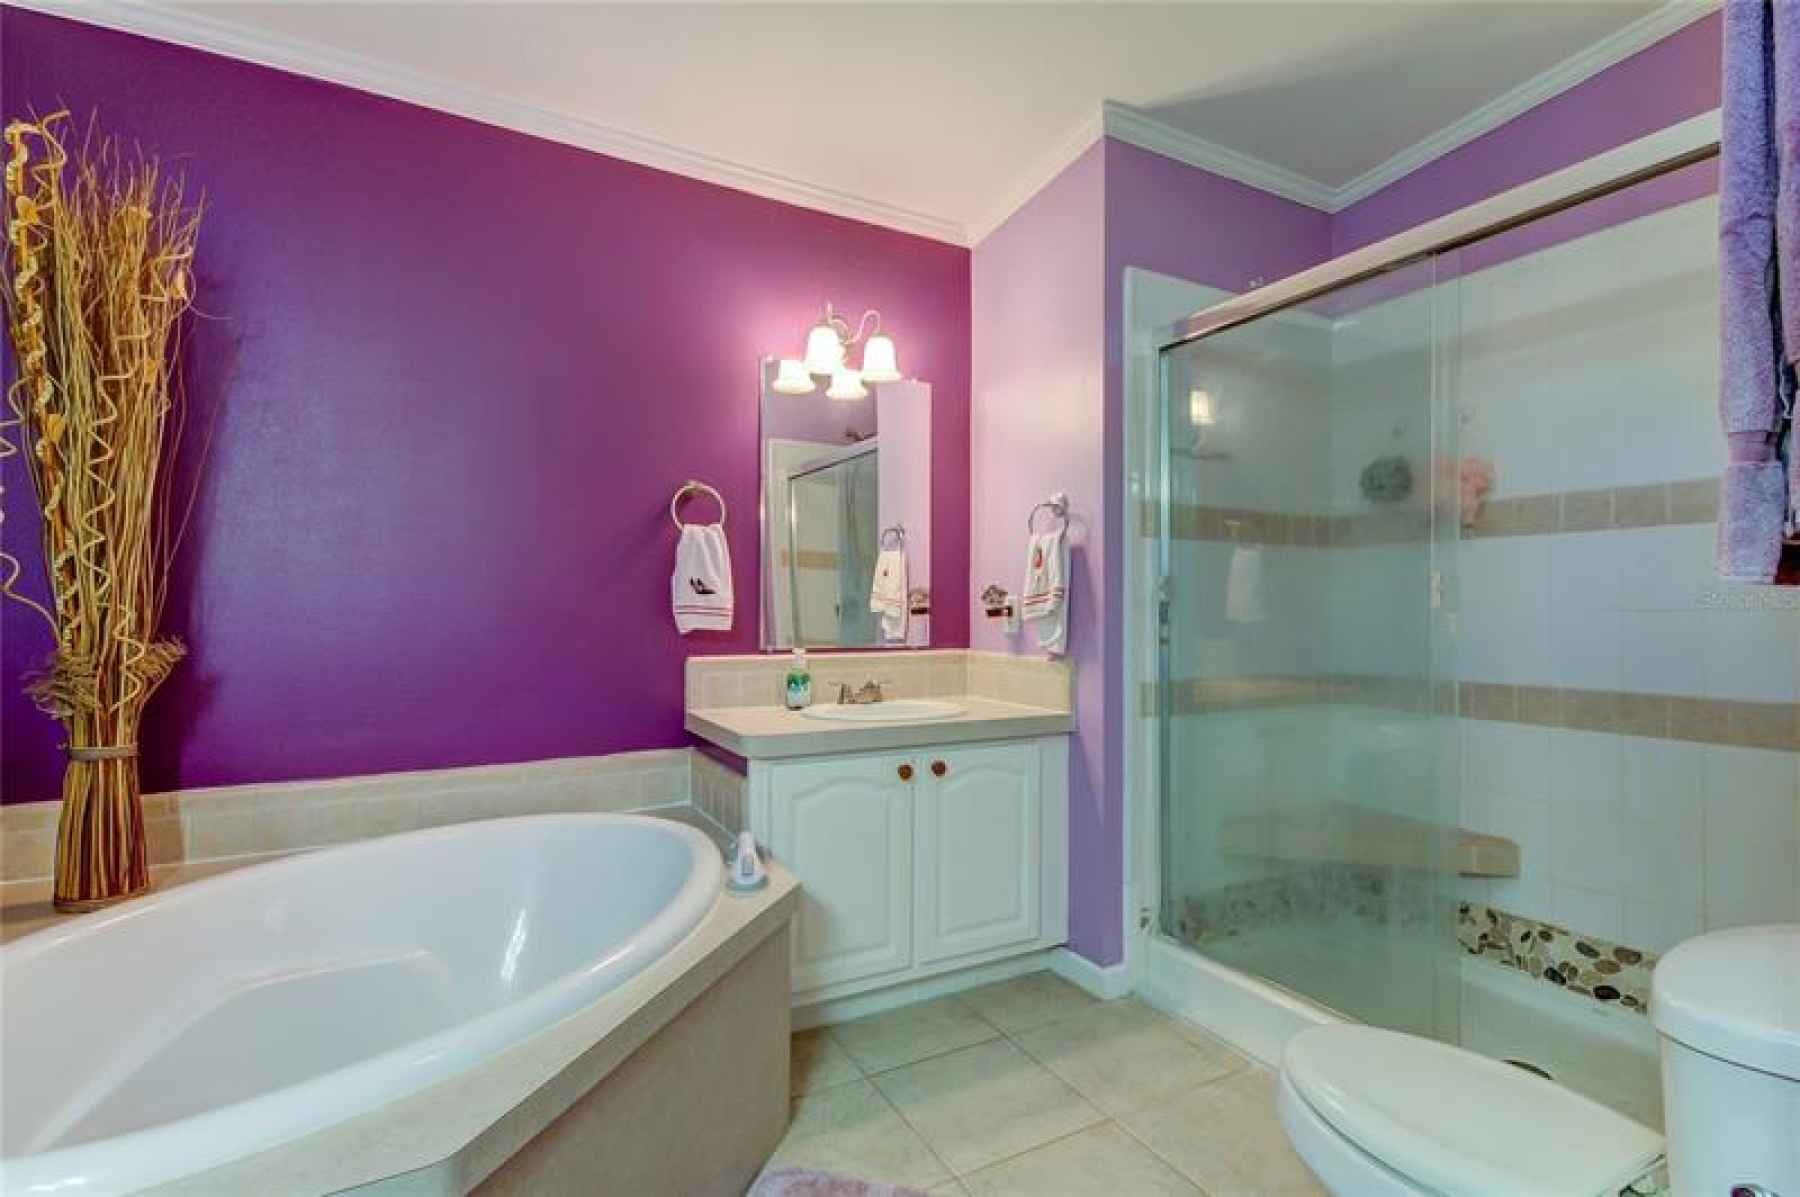 LARGE WALK-IN SHOWER & TUB TO SOAK IN!